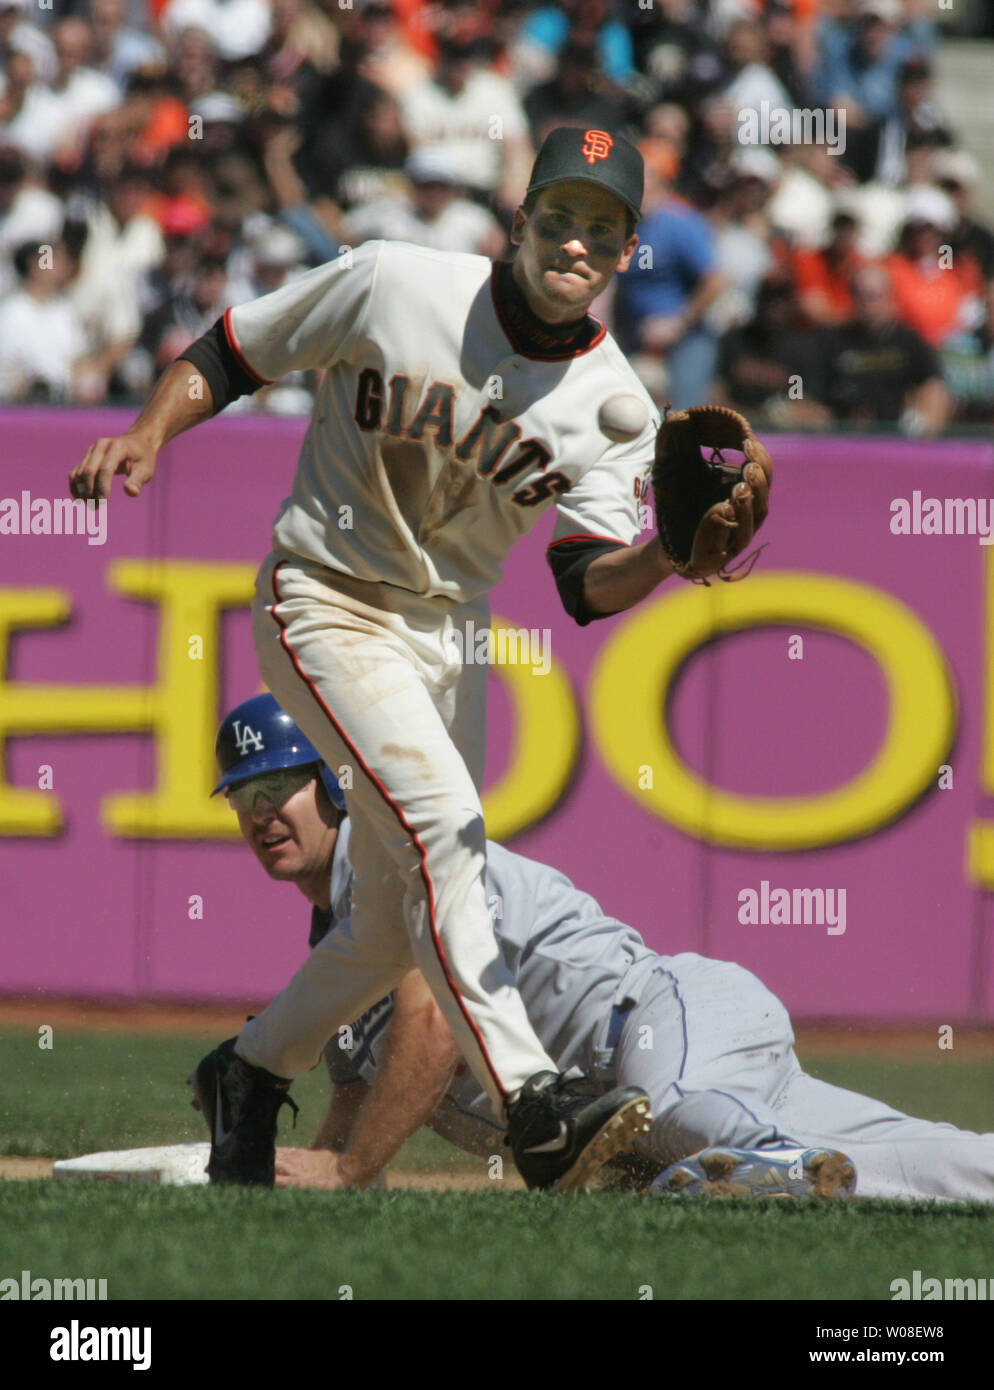 Jeff Kent's Greatest Moments, A look back at Jeff Kent's greatest moments., By San Francisco Giants Highlights